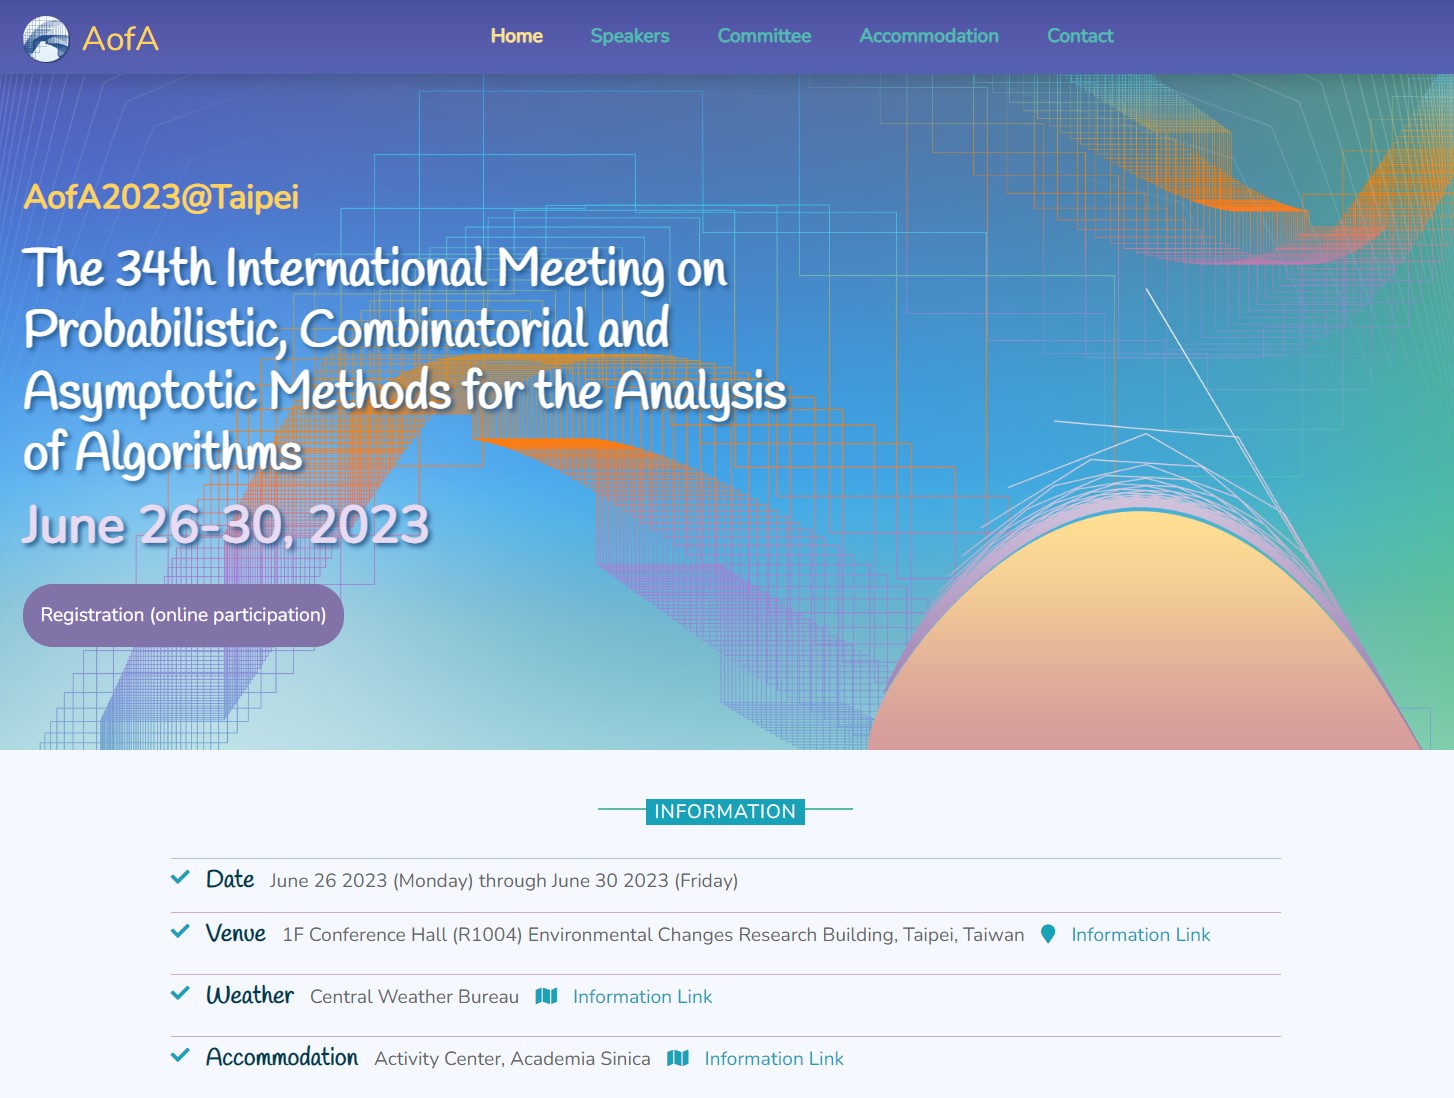 The 34th International Meeting on Probabilistic, Combinatorial and Asymptotic Methods for the Analysis of Algorithms